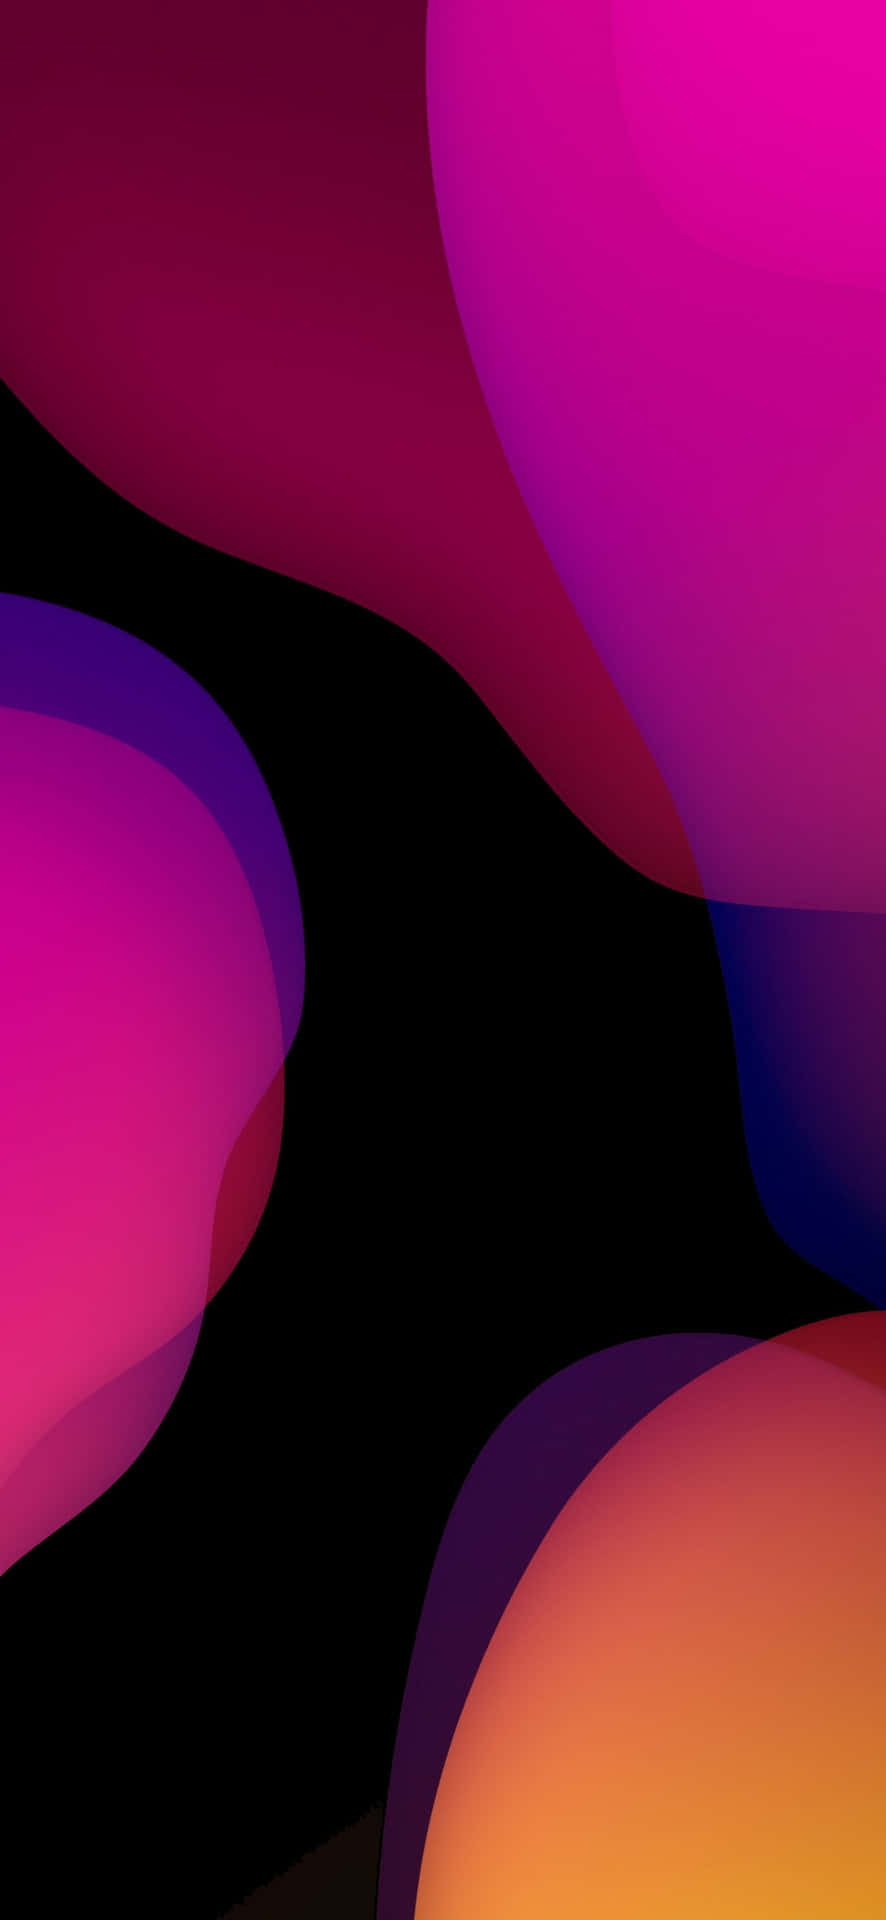 Download Ios 1 Purple And Red Bubbles Wallpaper | Wallpapers.com